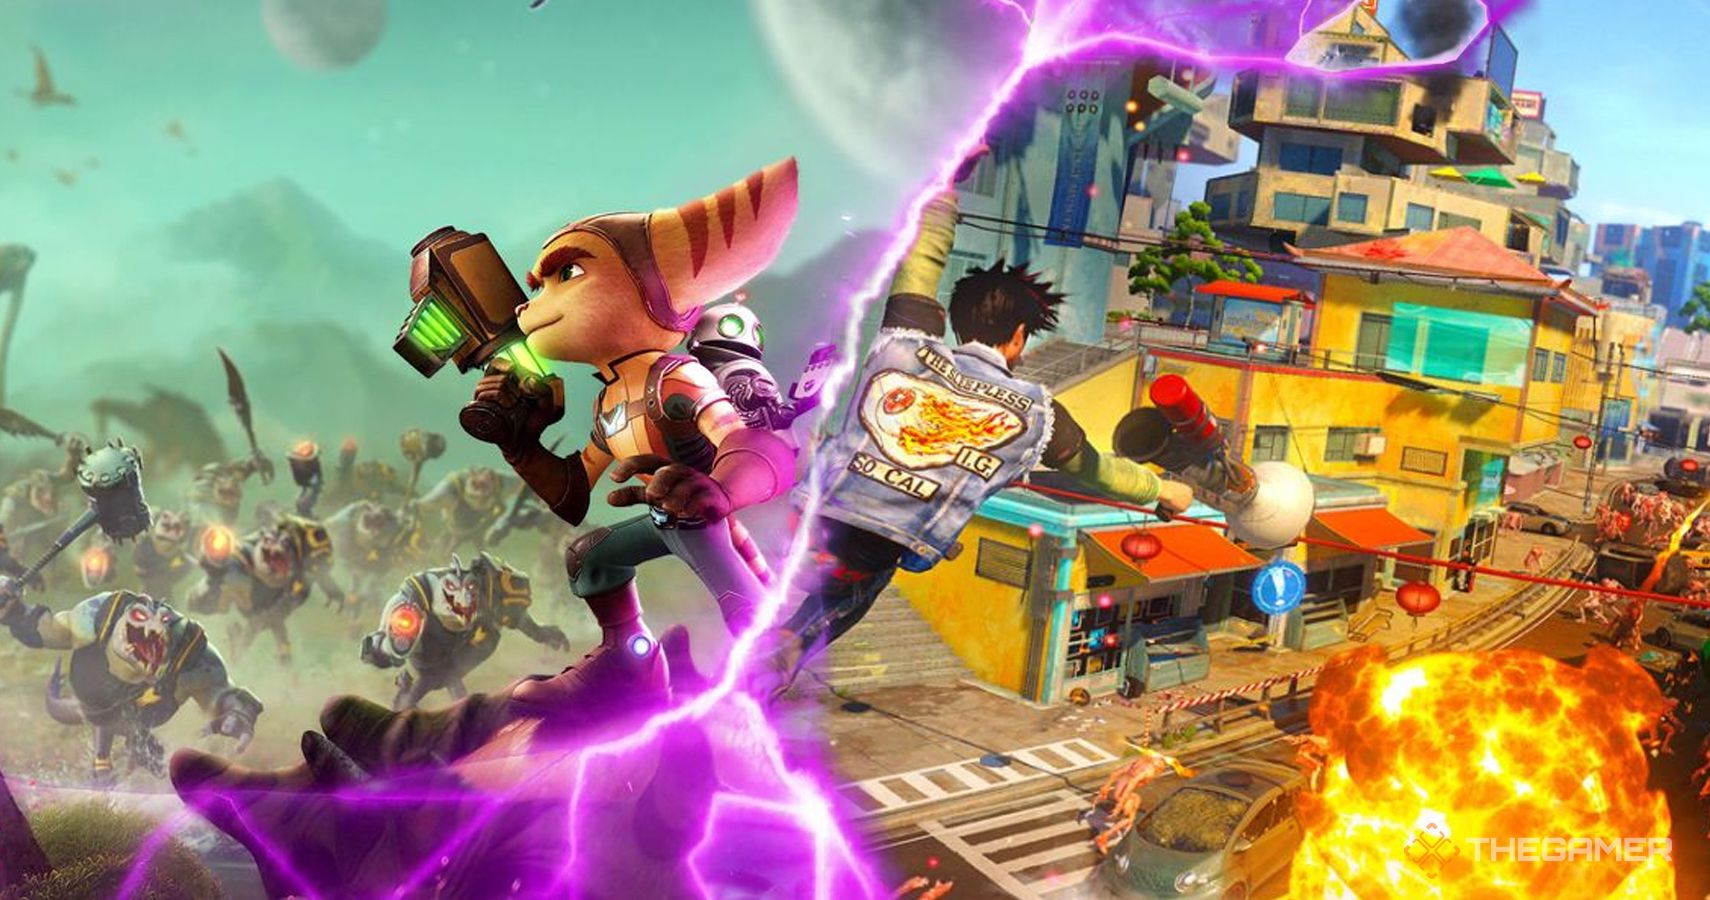 Ratchet And Clank: Rift Apart Is A Sunset Overdrive Spiritual Successor